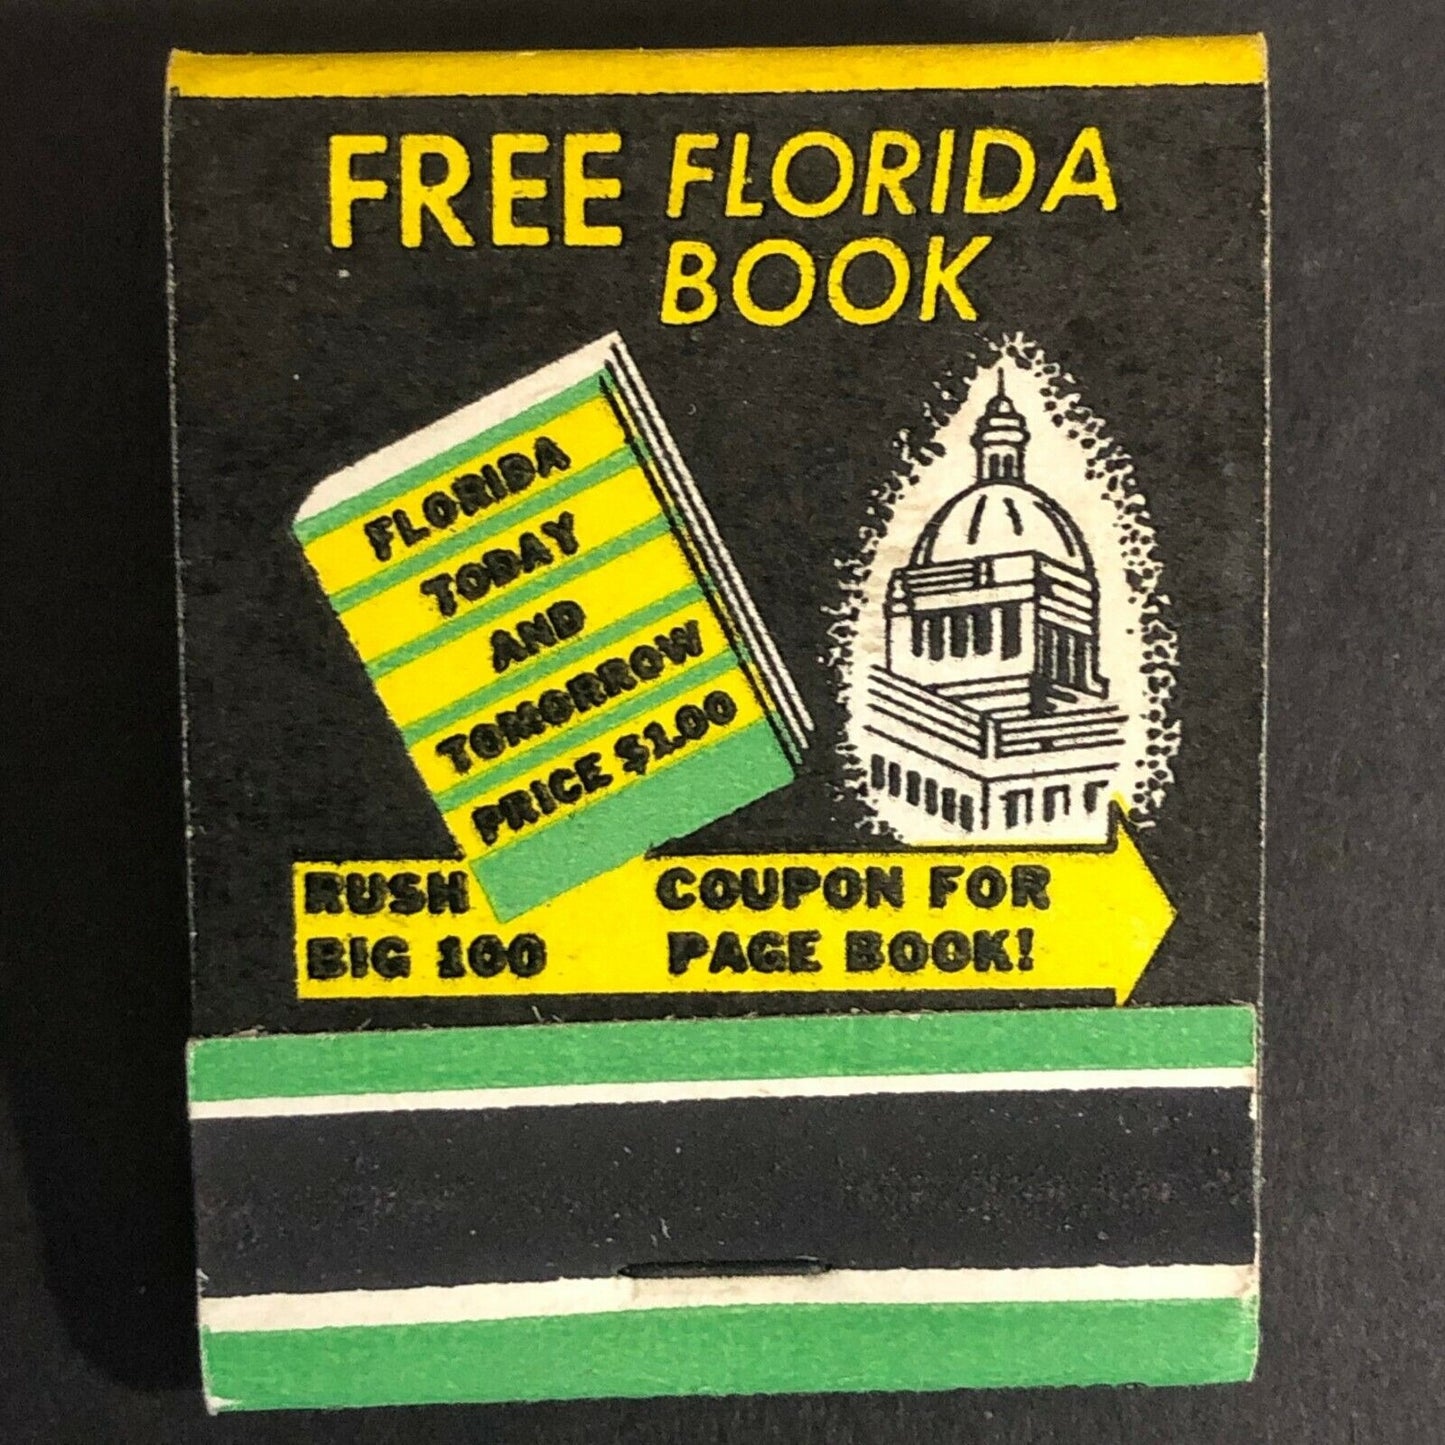 Vintage c1960's Full Matchbook "Free Florida Confidential Facts Book" Mail Offer